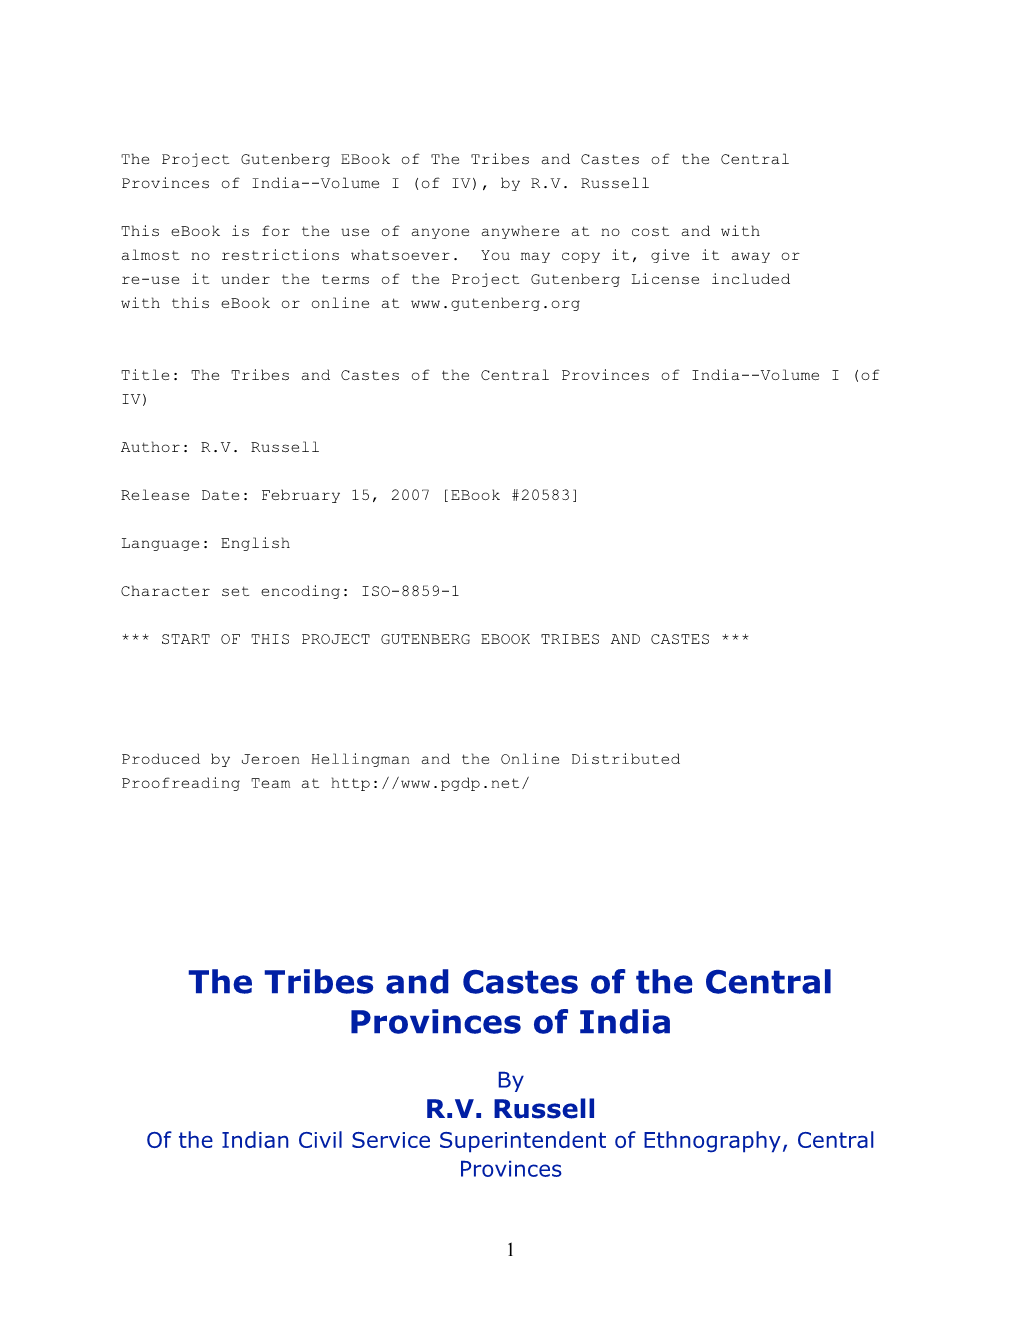 The Project Gutenberg Ebook of the Tribes and Castes of the Central Provinces of India--Volume I (Of IV), by R.V